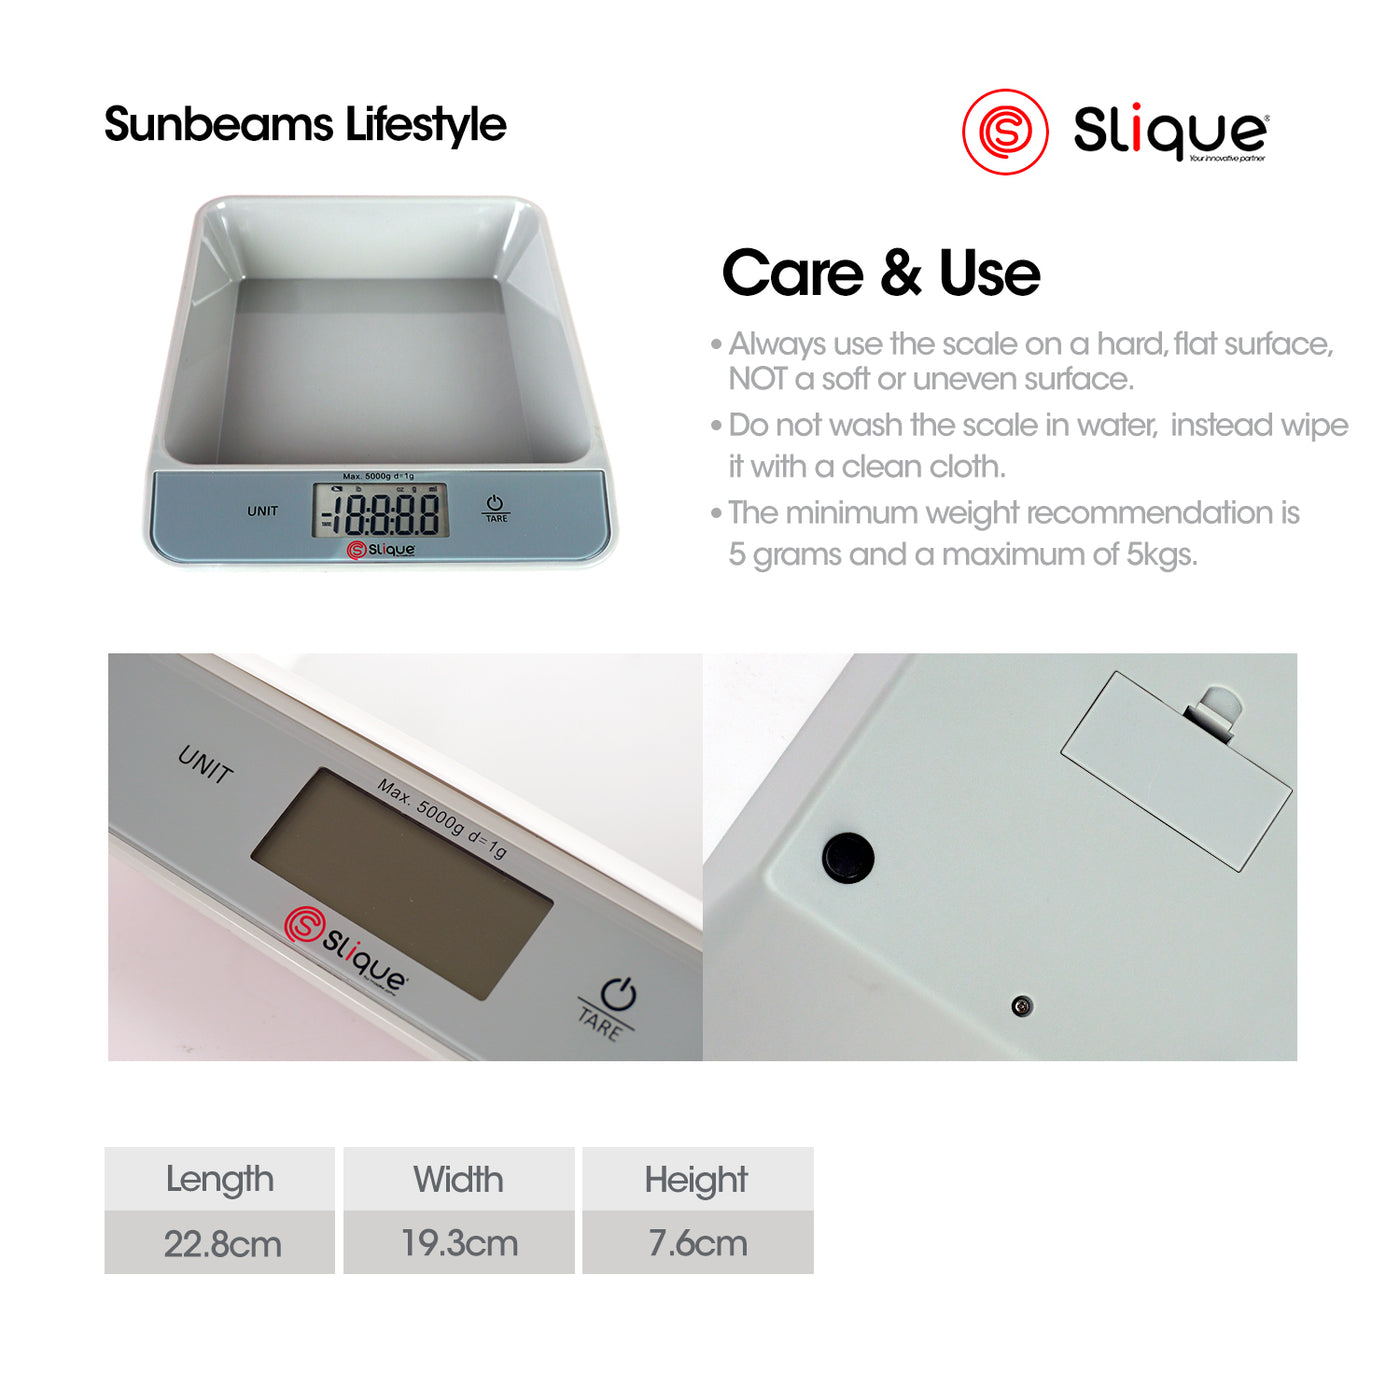 Slique Digital Kitchen Weighing Scale Tempered Glass White High Precission